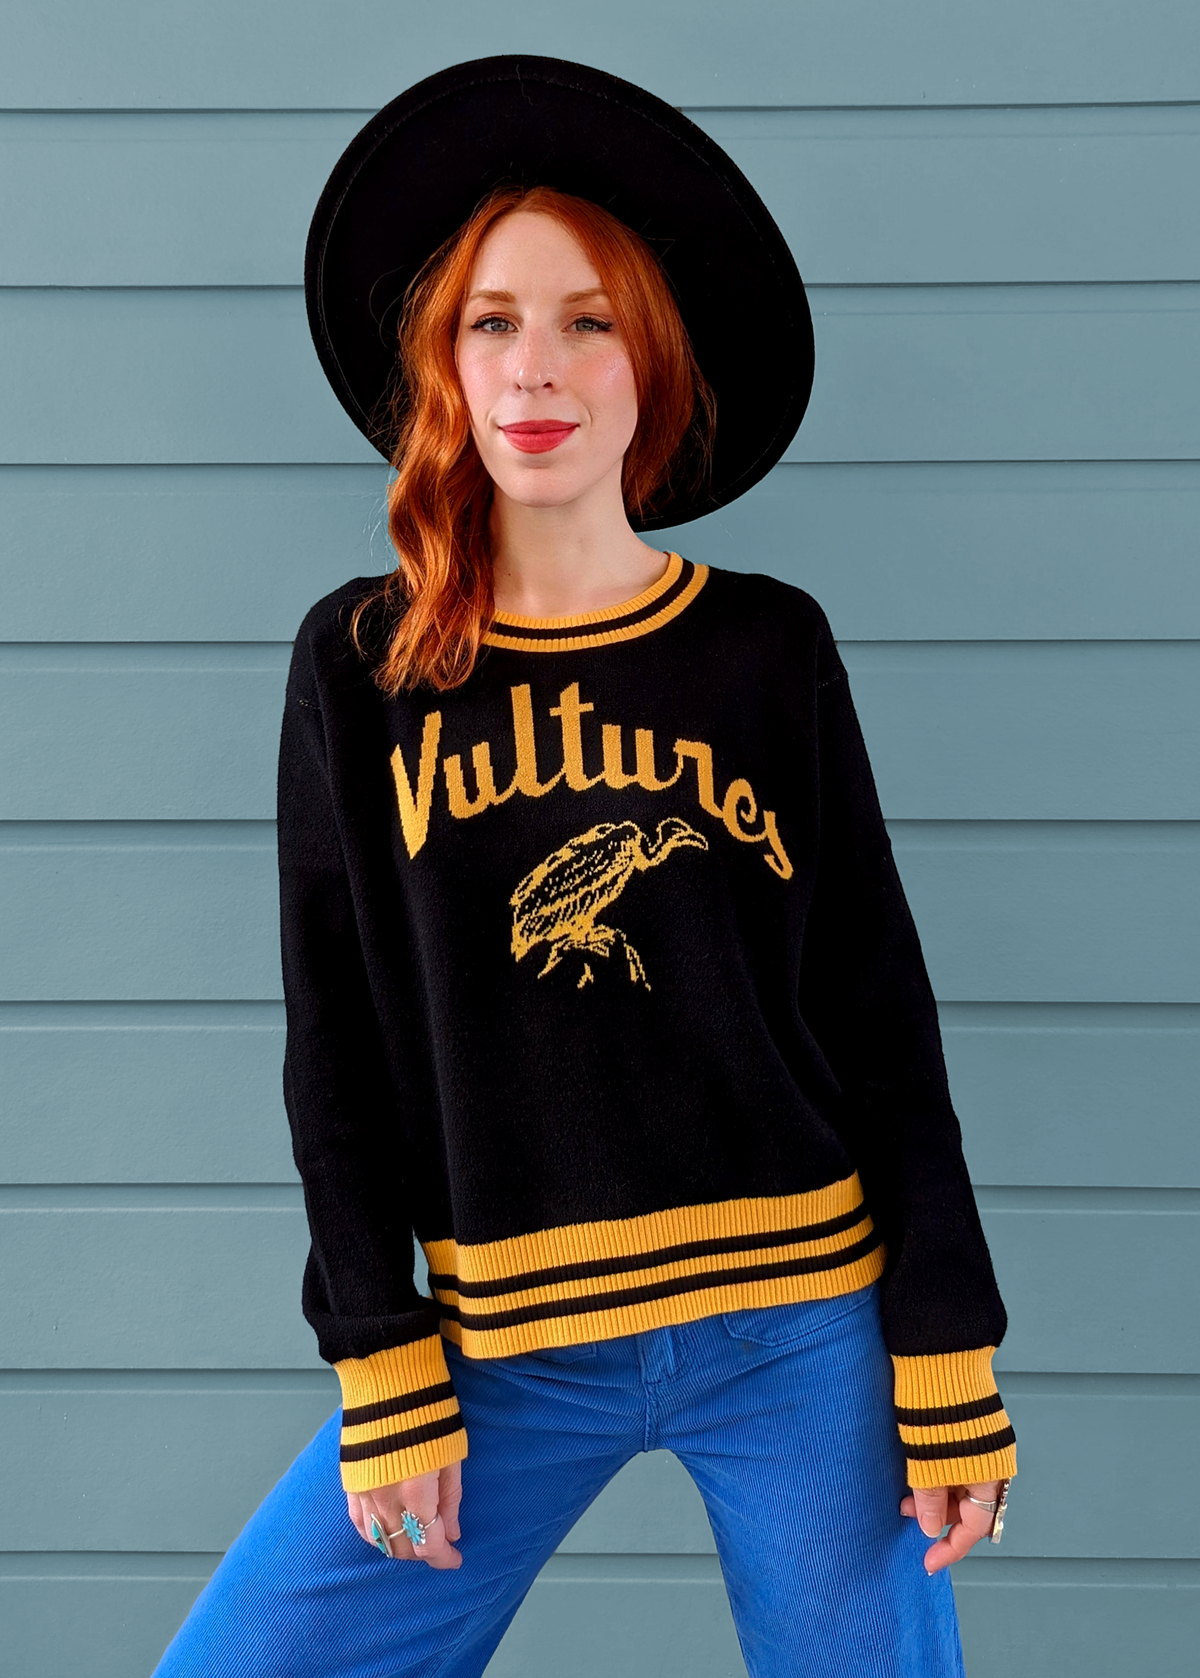 Daydreamer LA Vultures Blondie '76 oversized knit sweater in black and yellow gold 